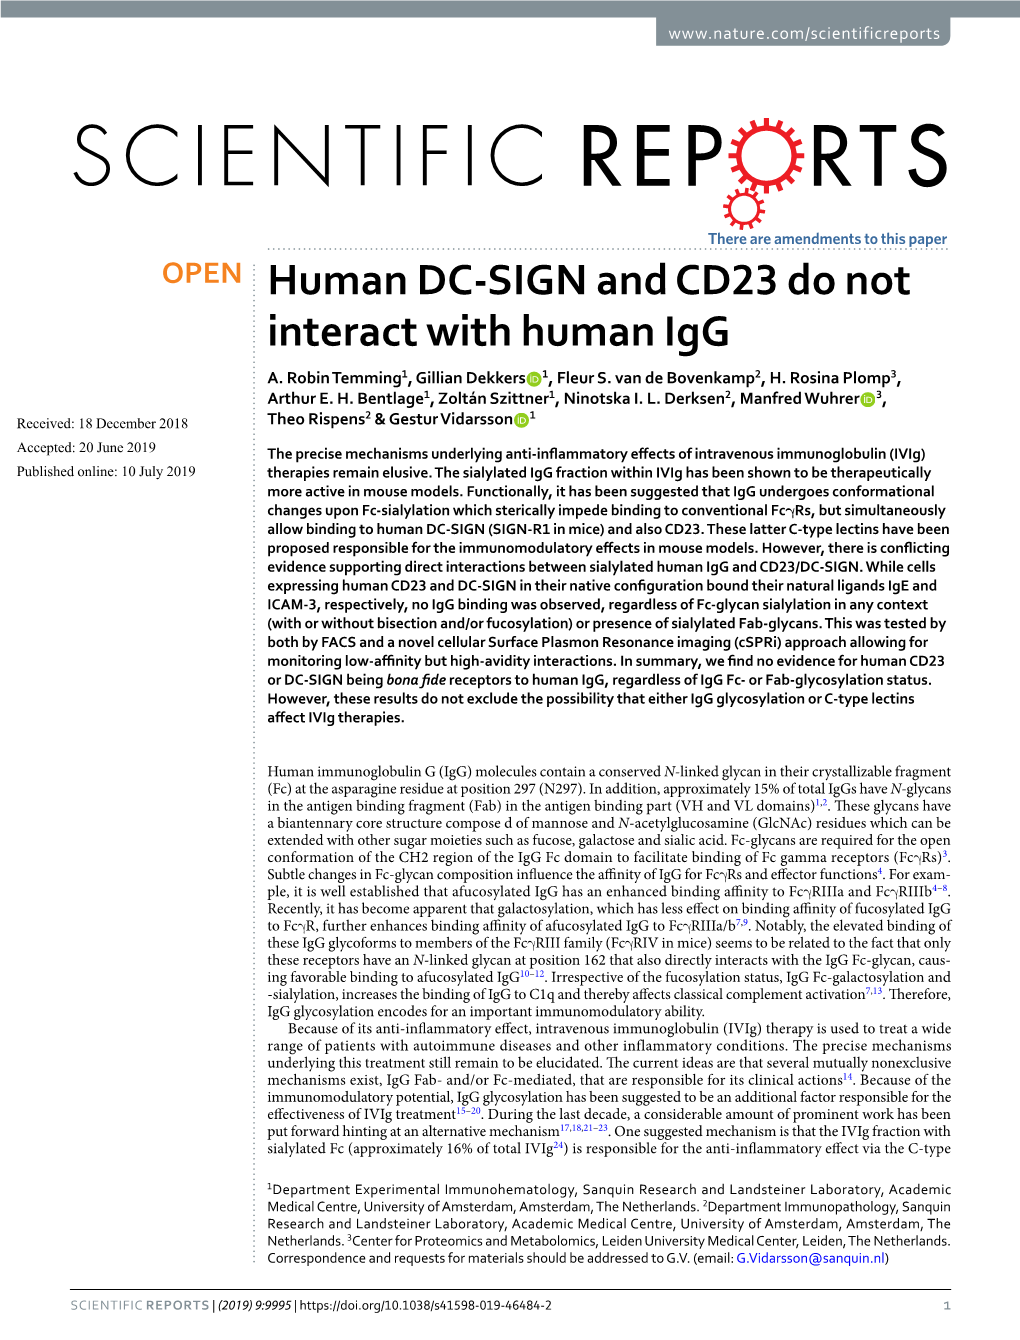 Human DC-SIGN and CD23 Do Not Interact with Human Igg A